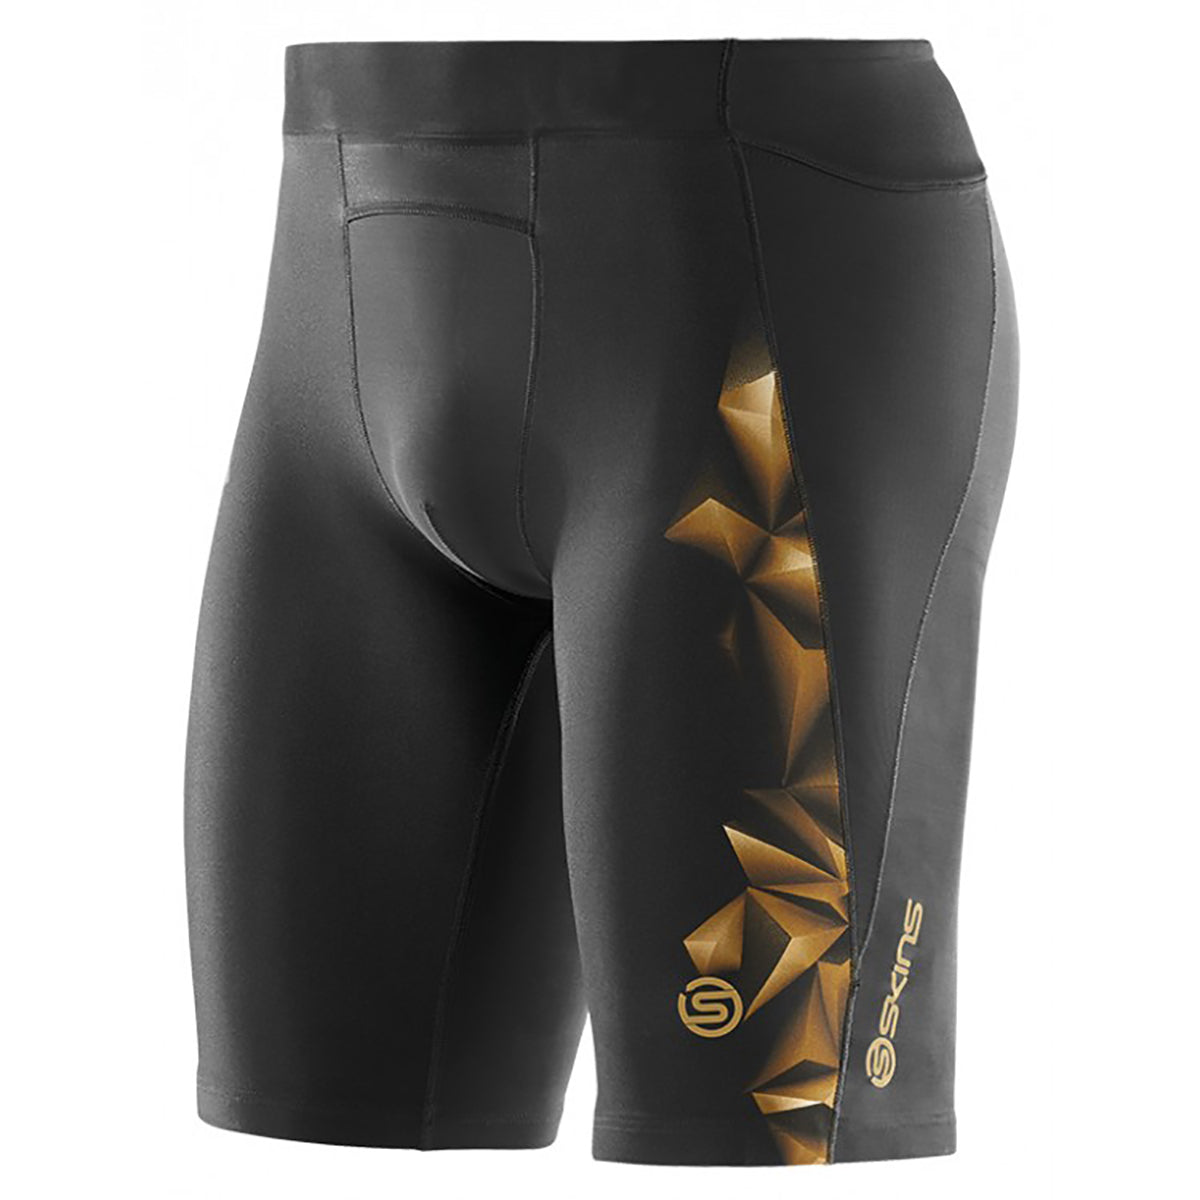 Cricket Direct on X: SKINS A400 Men's Half Tights have been